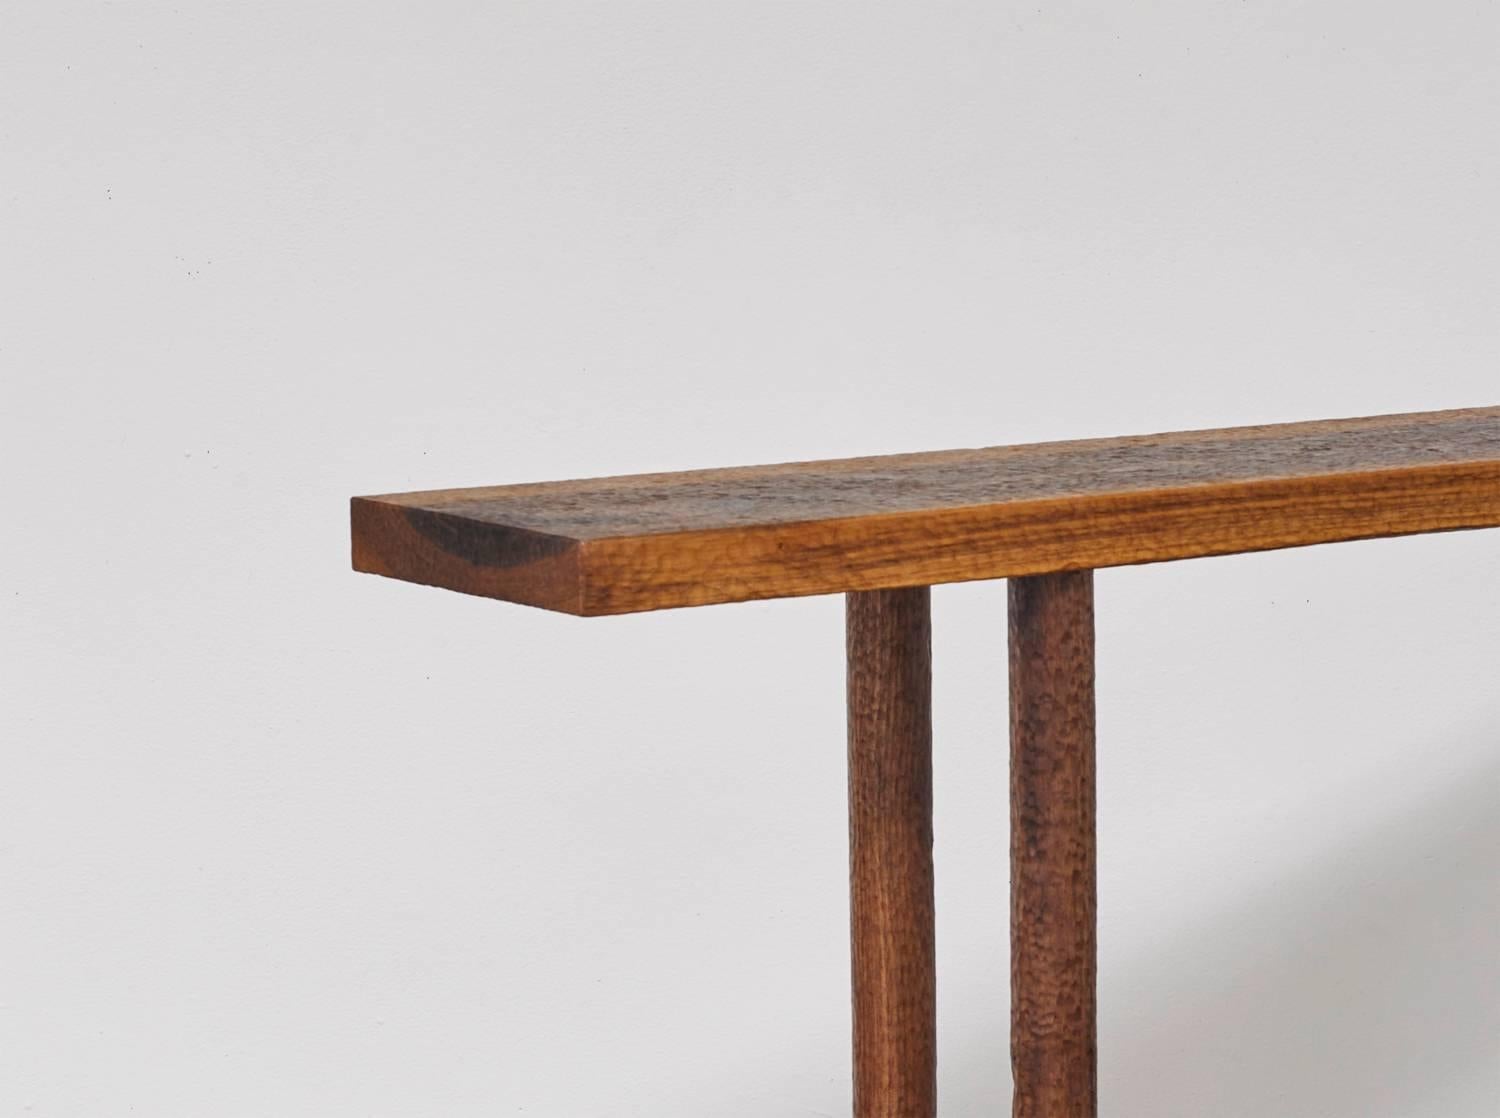 Walnut console table by Evan Fay
Measures: W 42